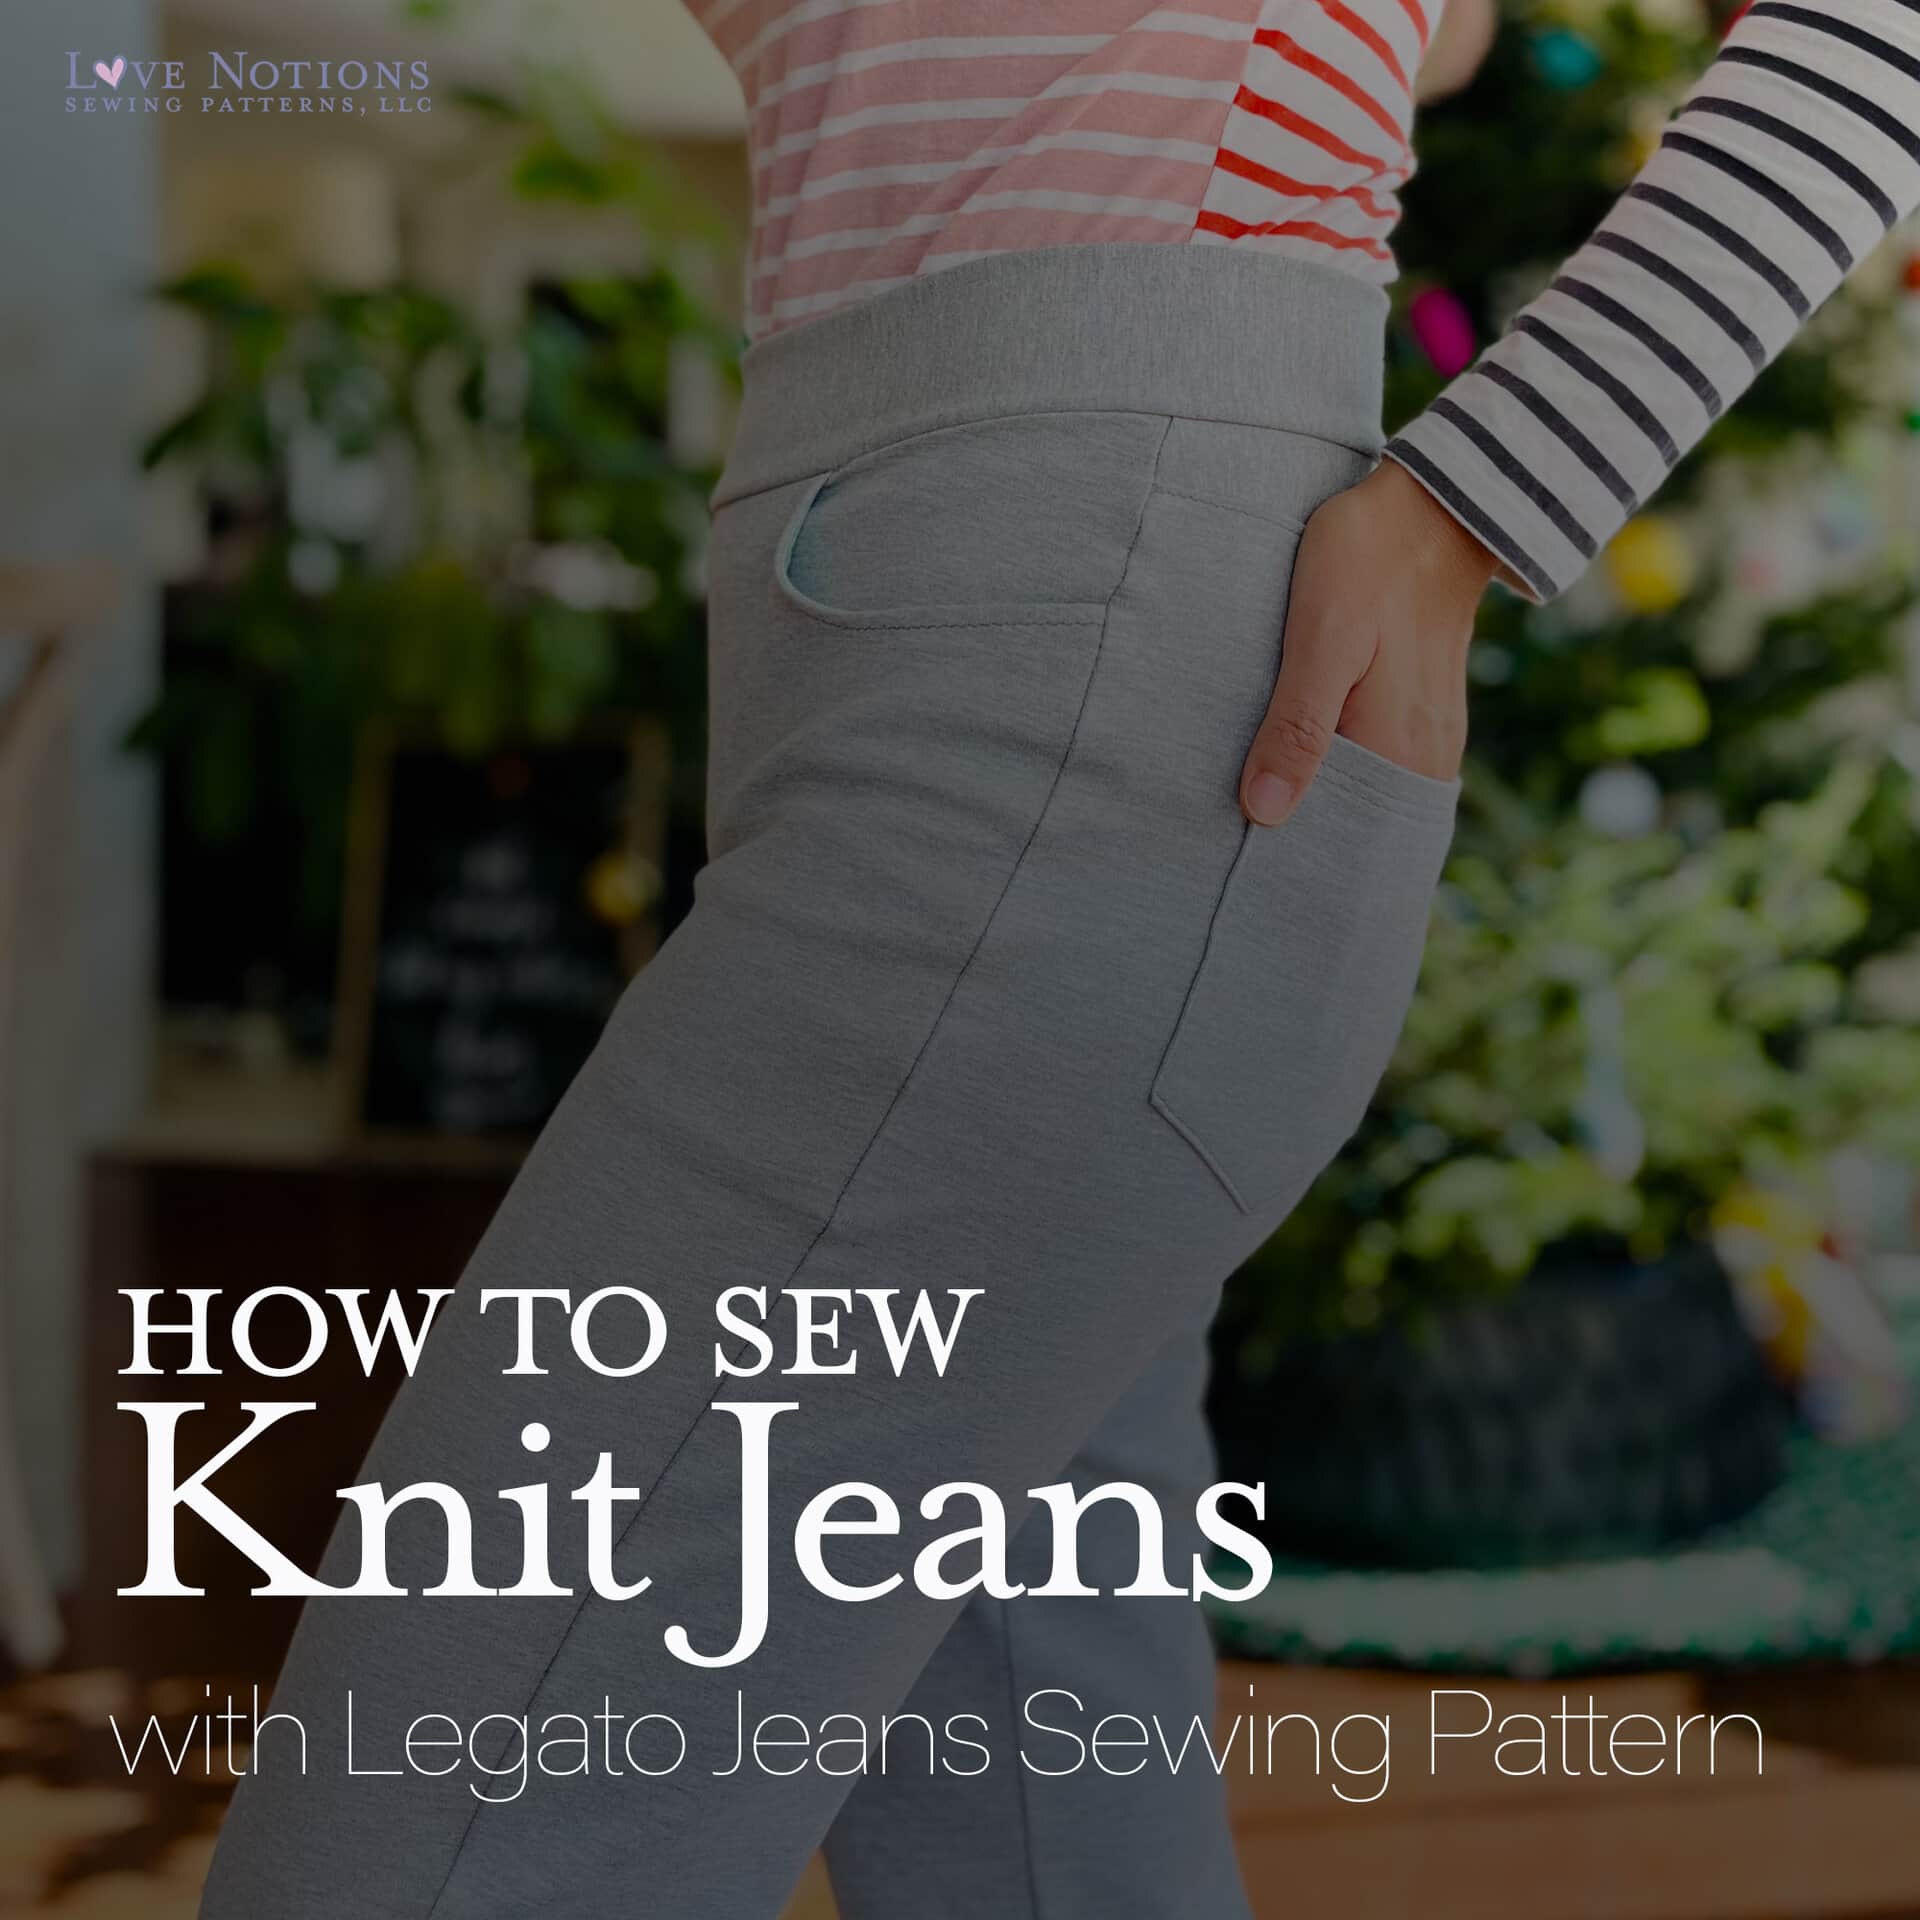 Denim Leggings with Fake Pockets and Cross Knit Pattern - Its All Leggings